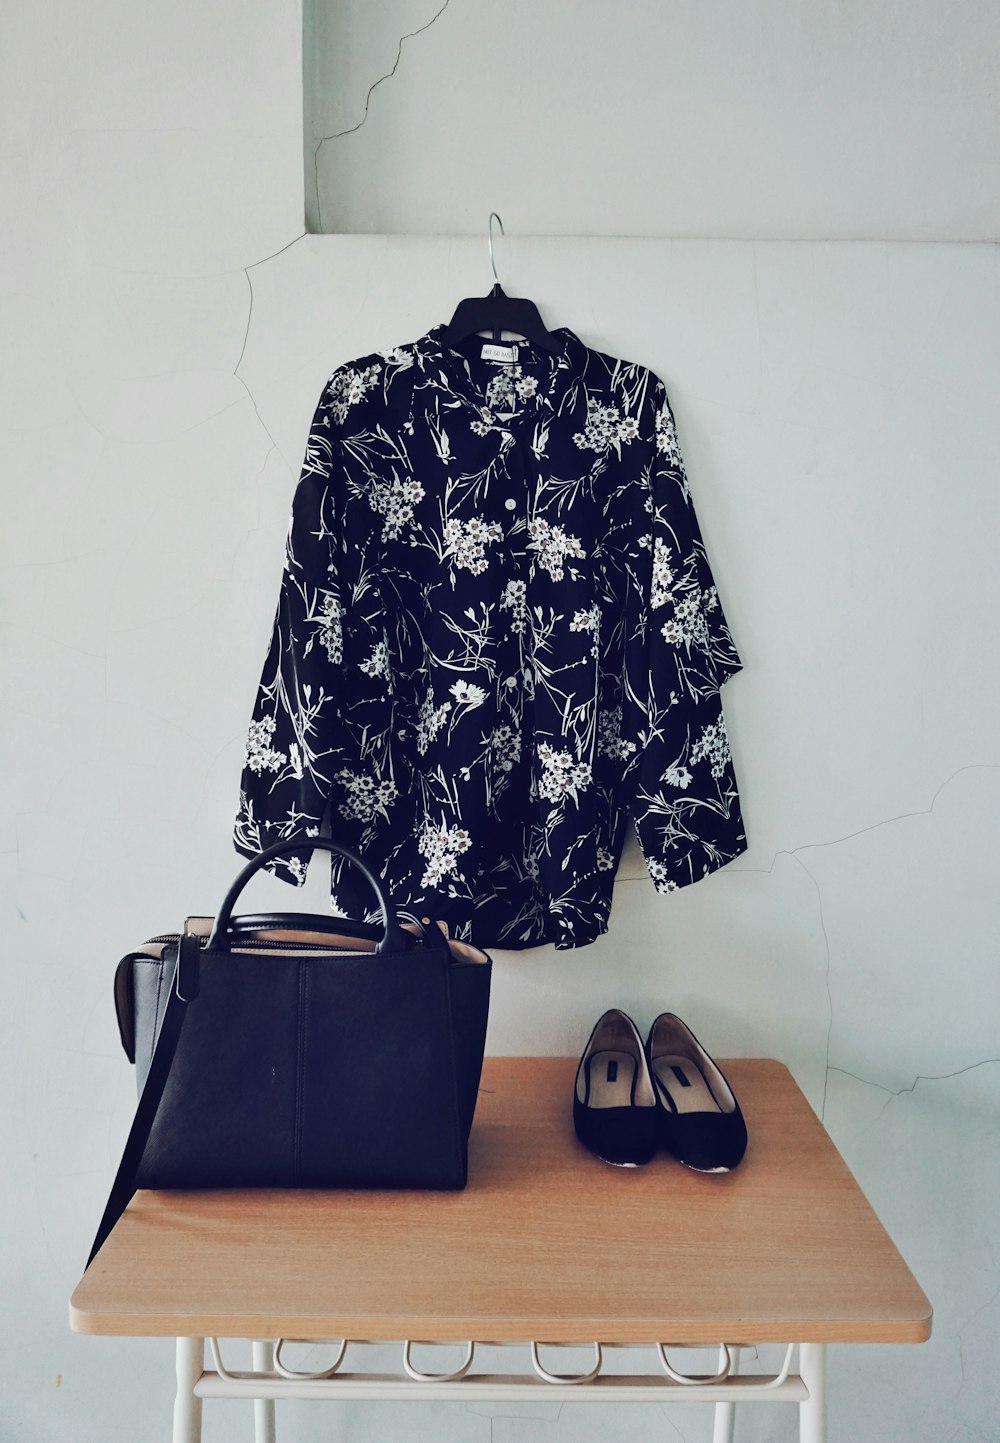 black and white floral sport shirt hanging beside black leather 2-way tote bag and ballet flats